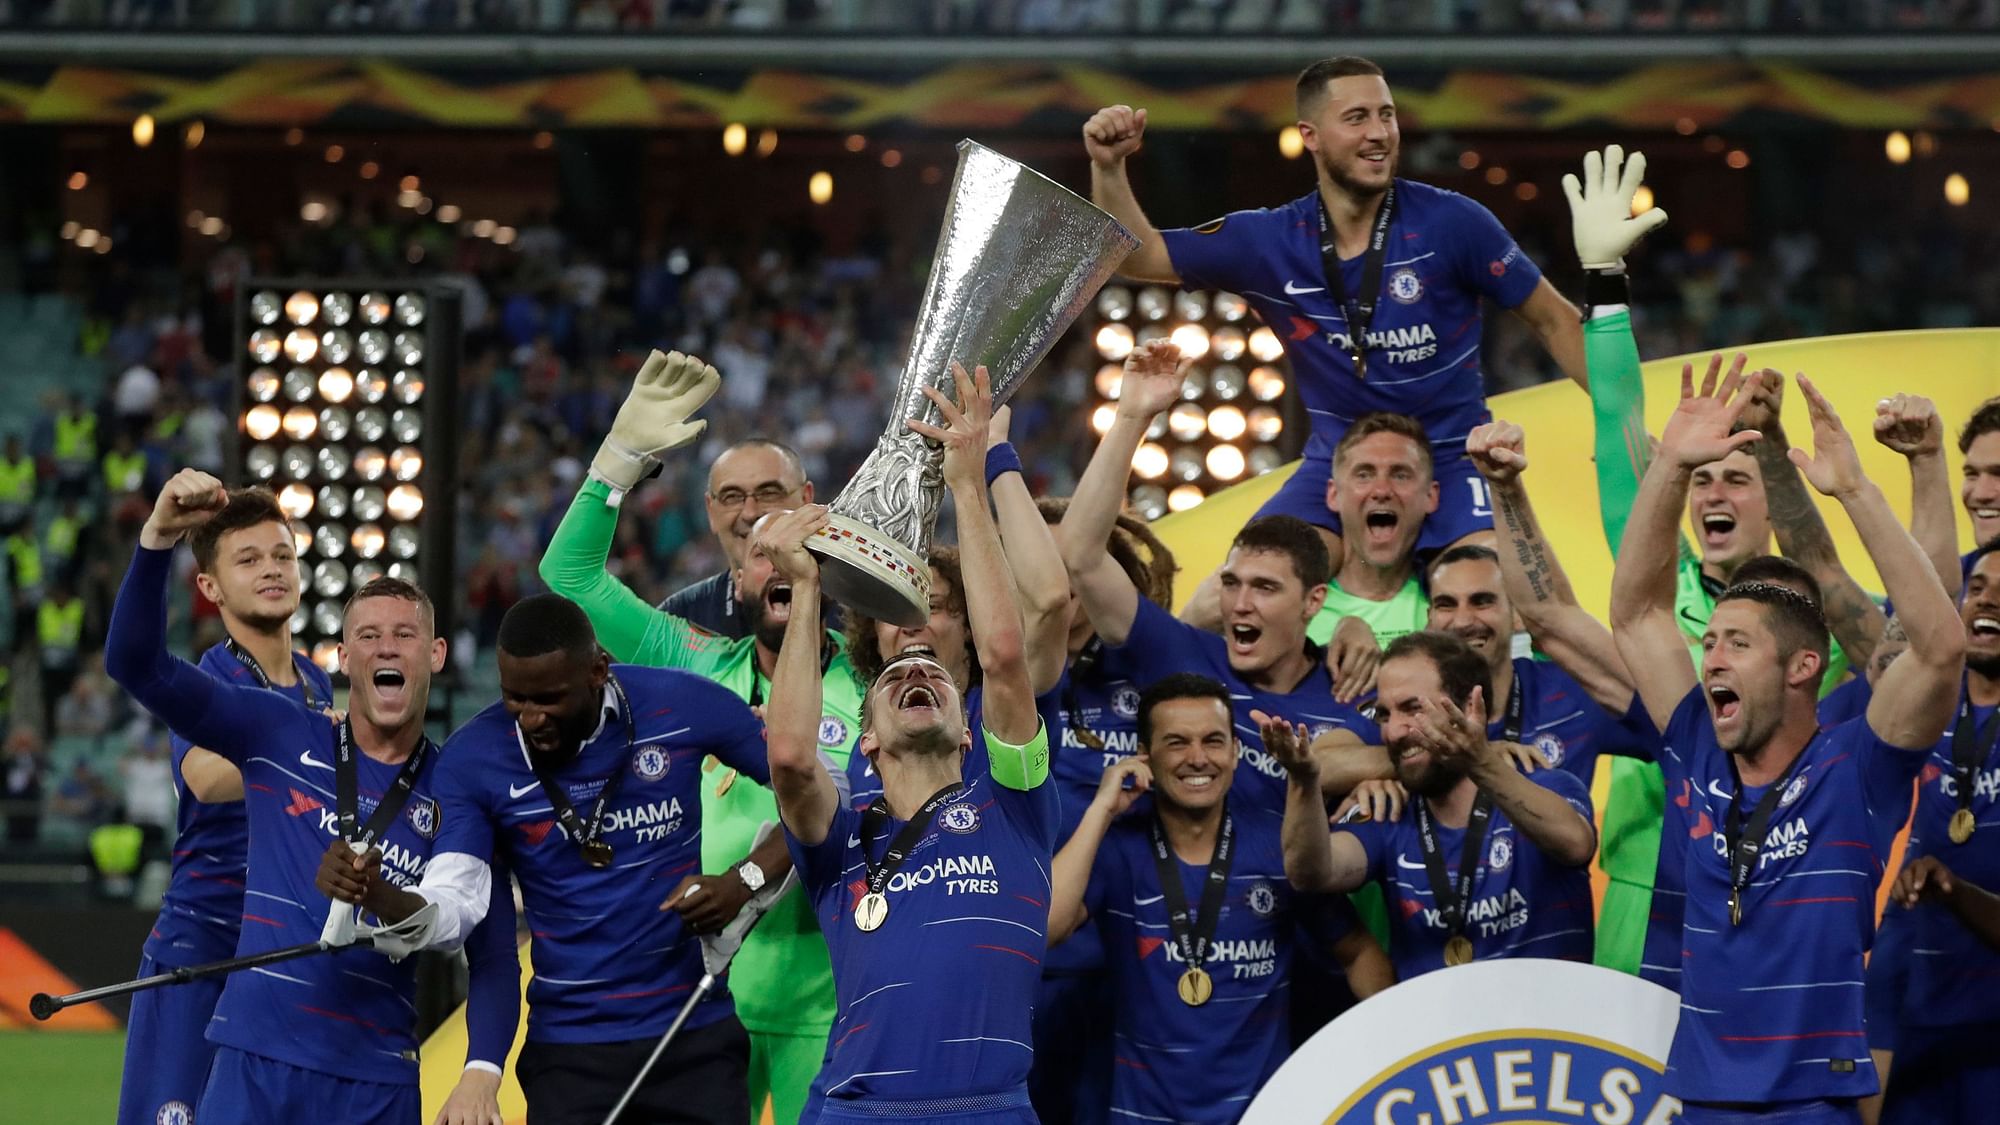 Hazard scored twice past his former teammate as Chelsea sliced through Arsenal in the second half of the Europa League final.